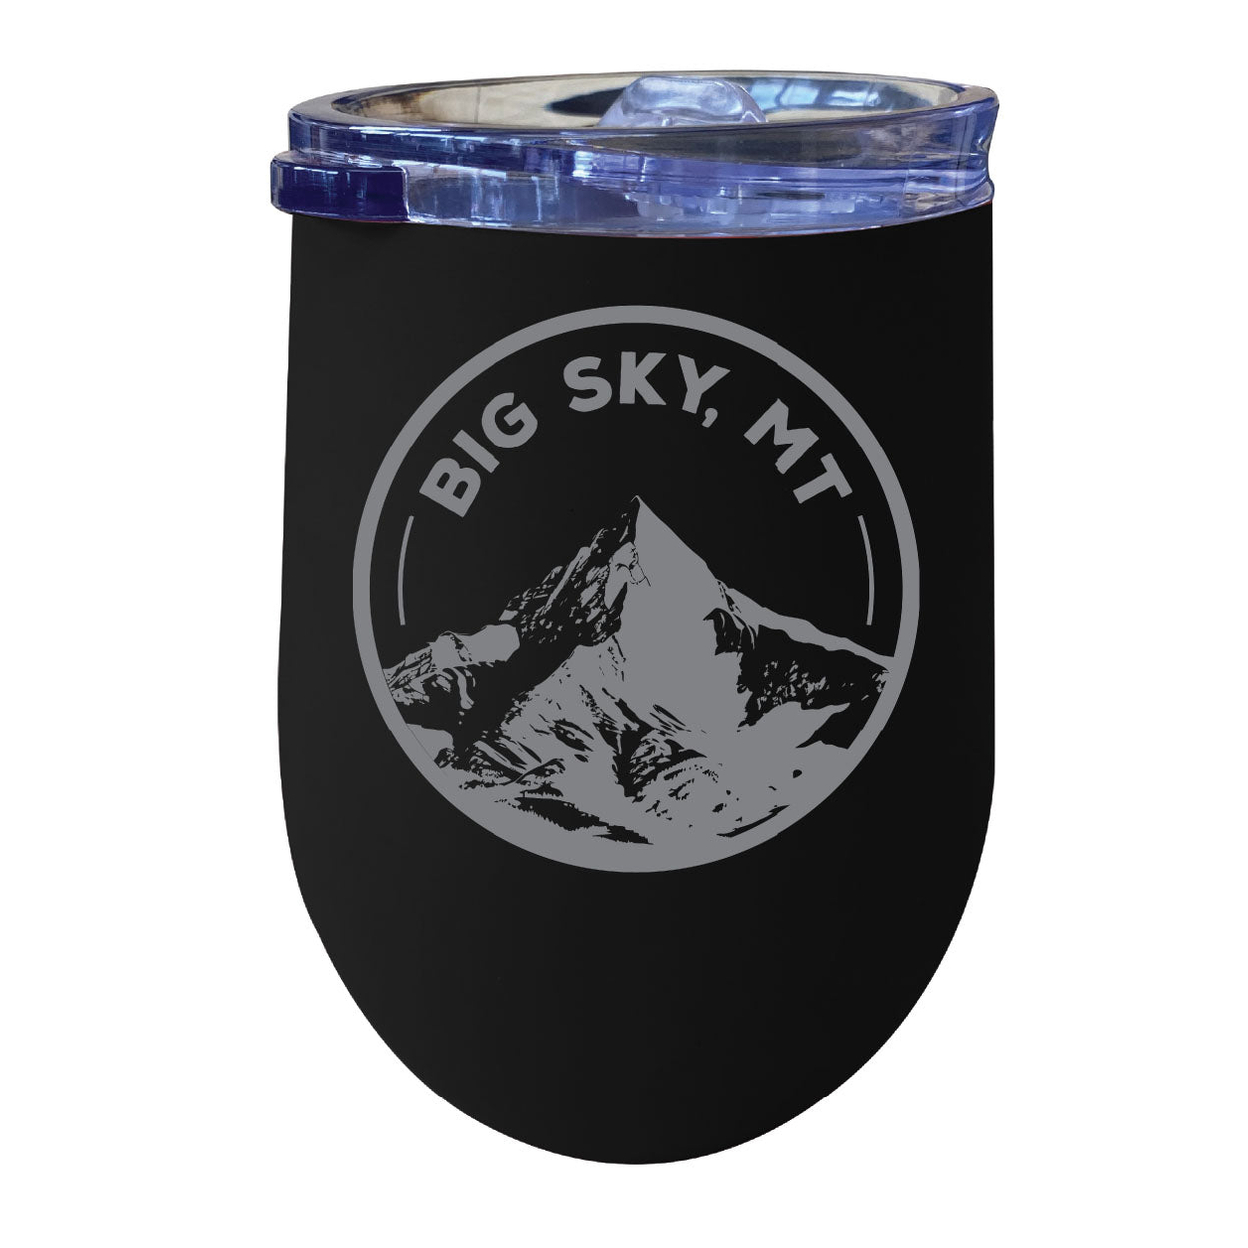 Big Sky Montana Souvenir 12 Oz Engraved Insulated Wine Stainless Steel Tumbler - Black,,2-Pack